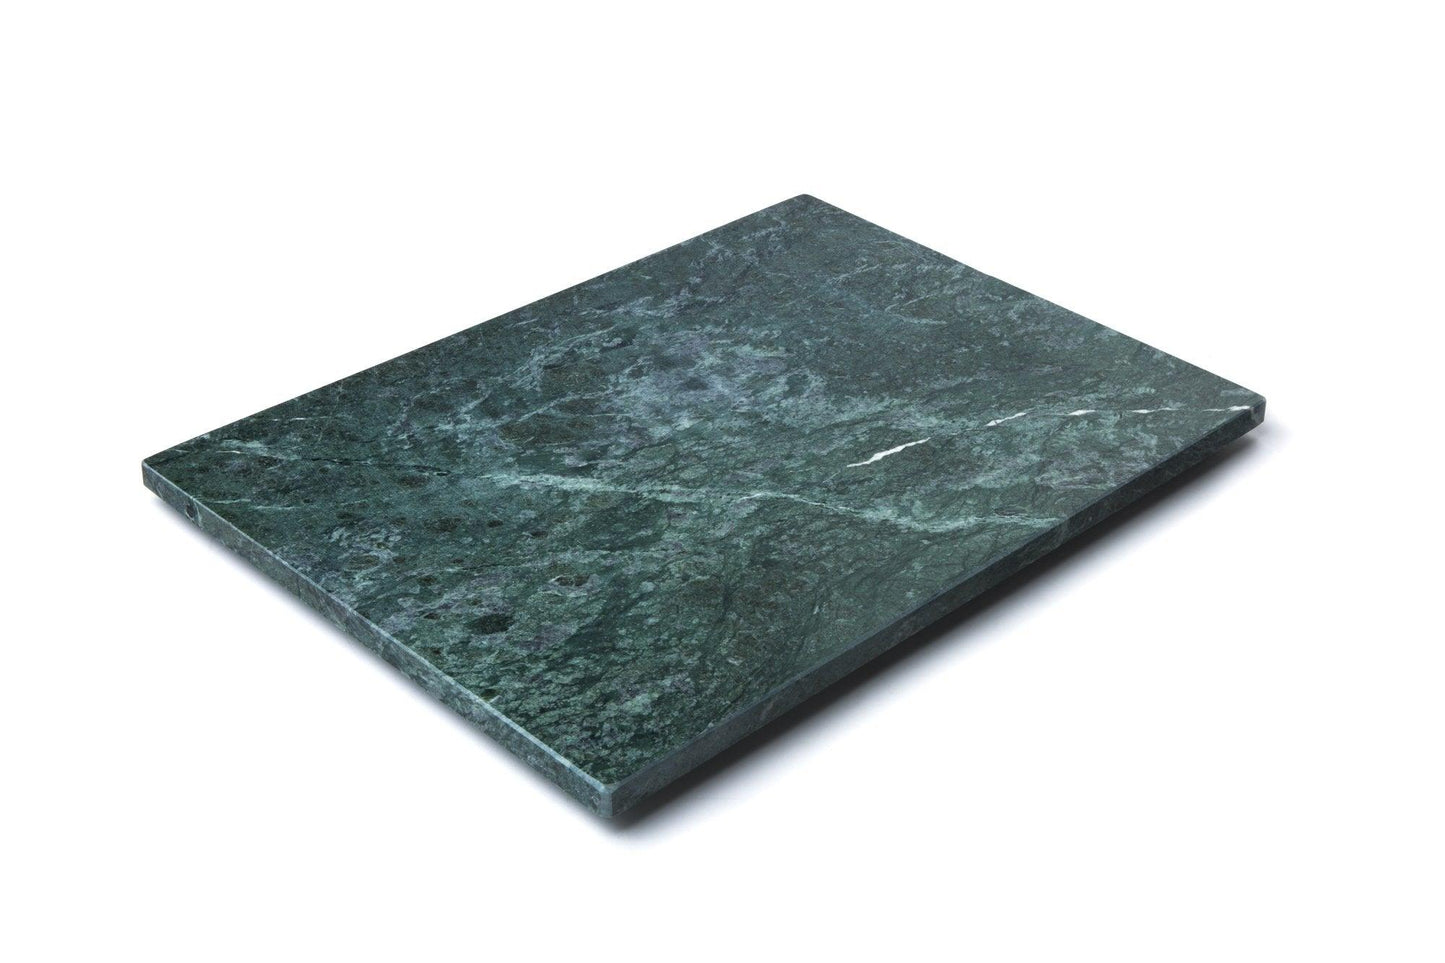 Fox Run Marble Pastry Board, Green 12.25 x 16 x 1 inches - CookCave